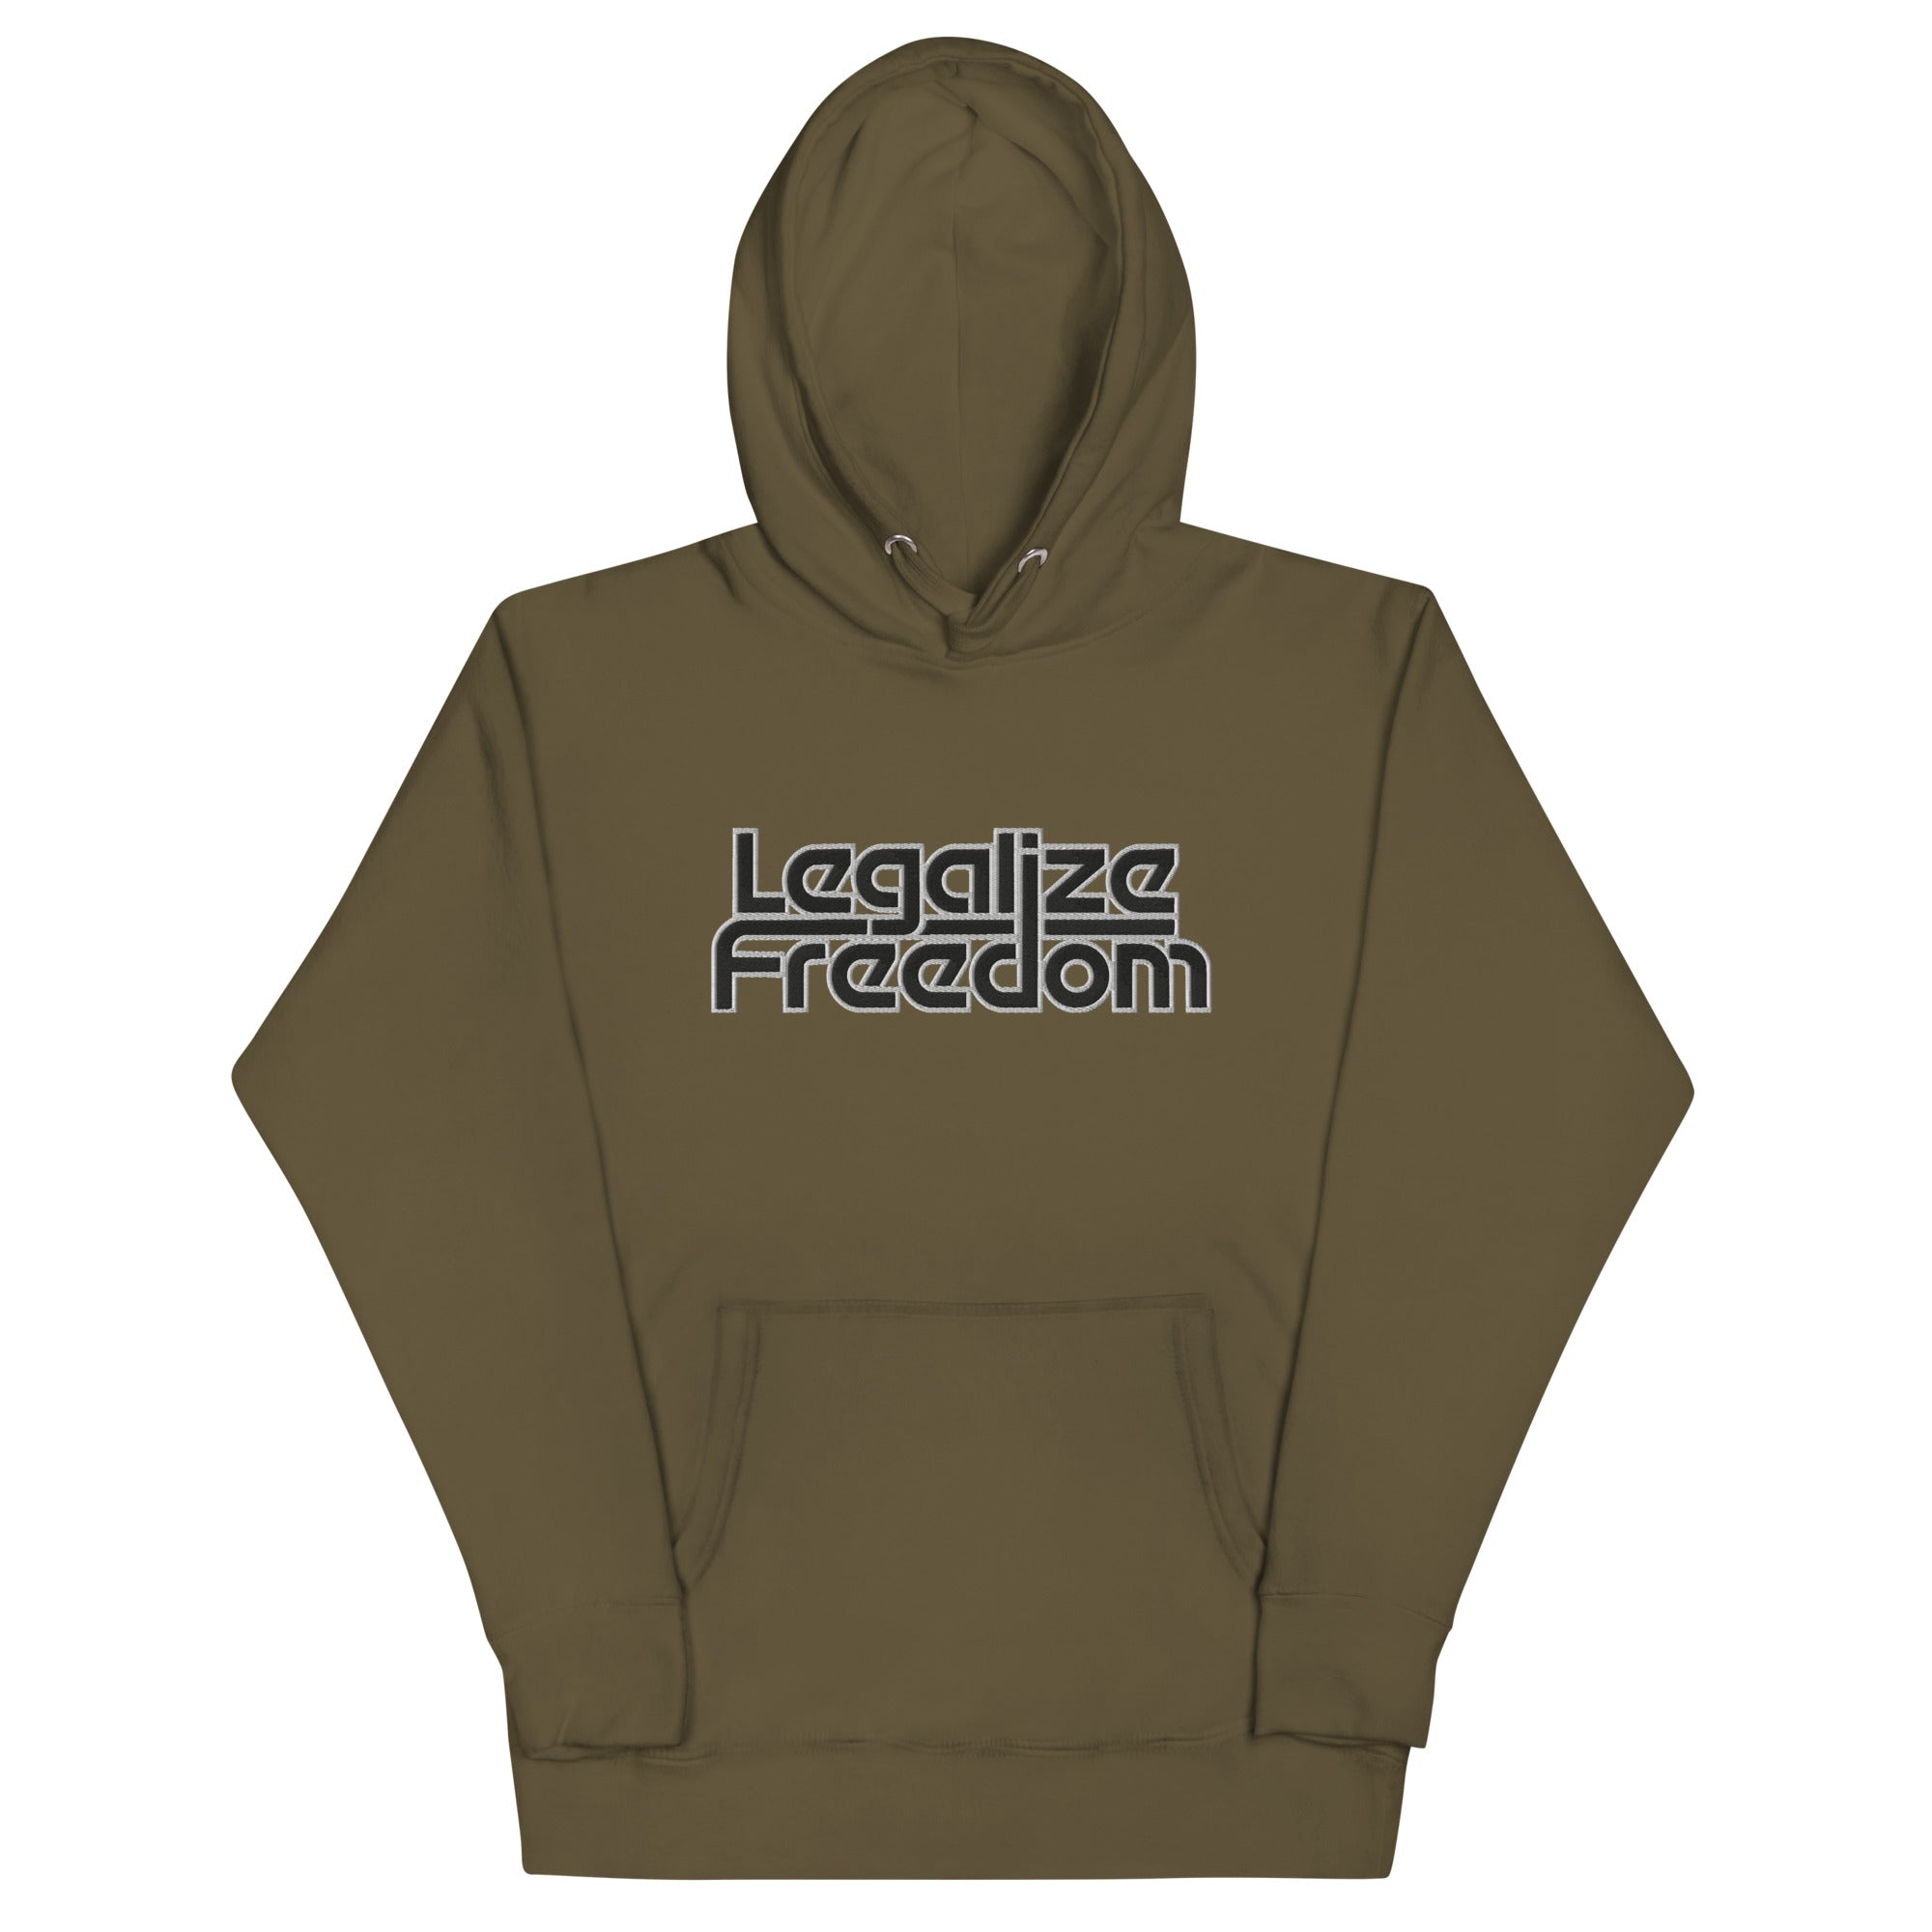 Legalize Freedom Embroidered Hoodie